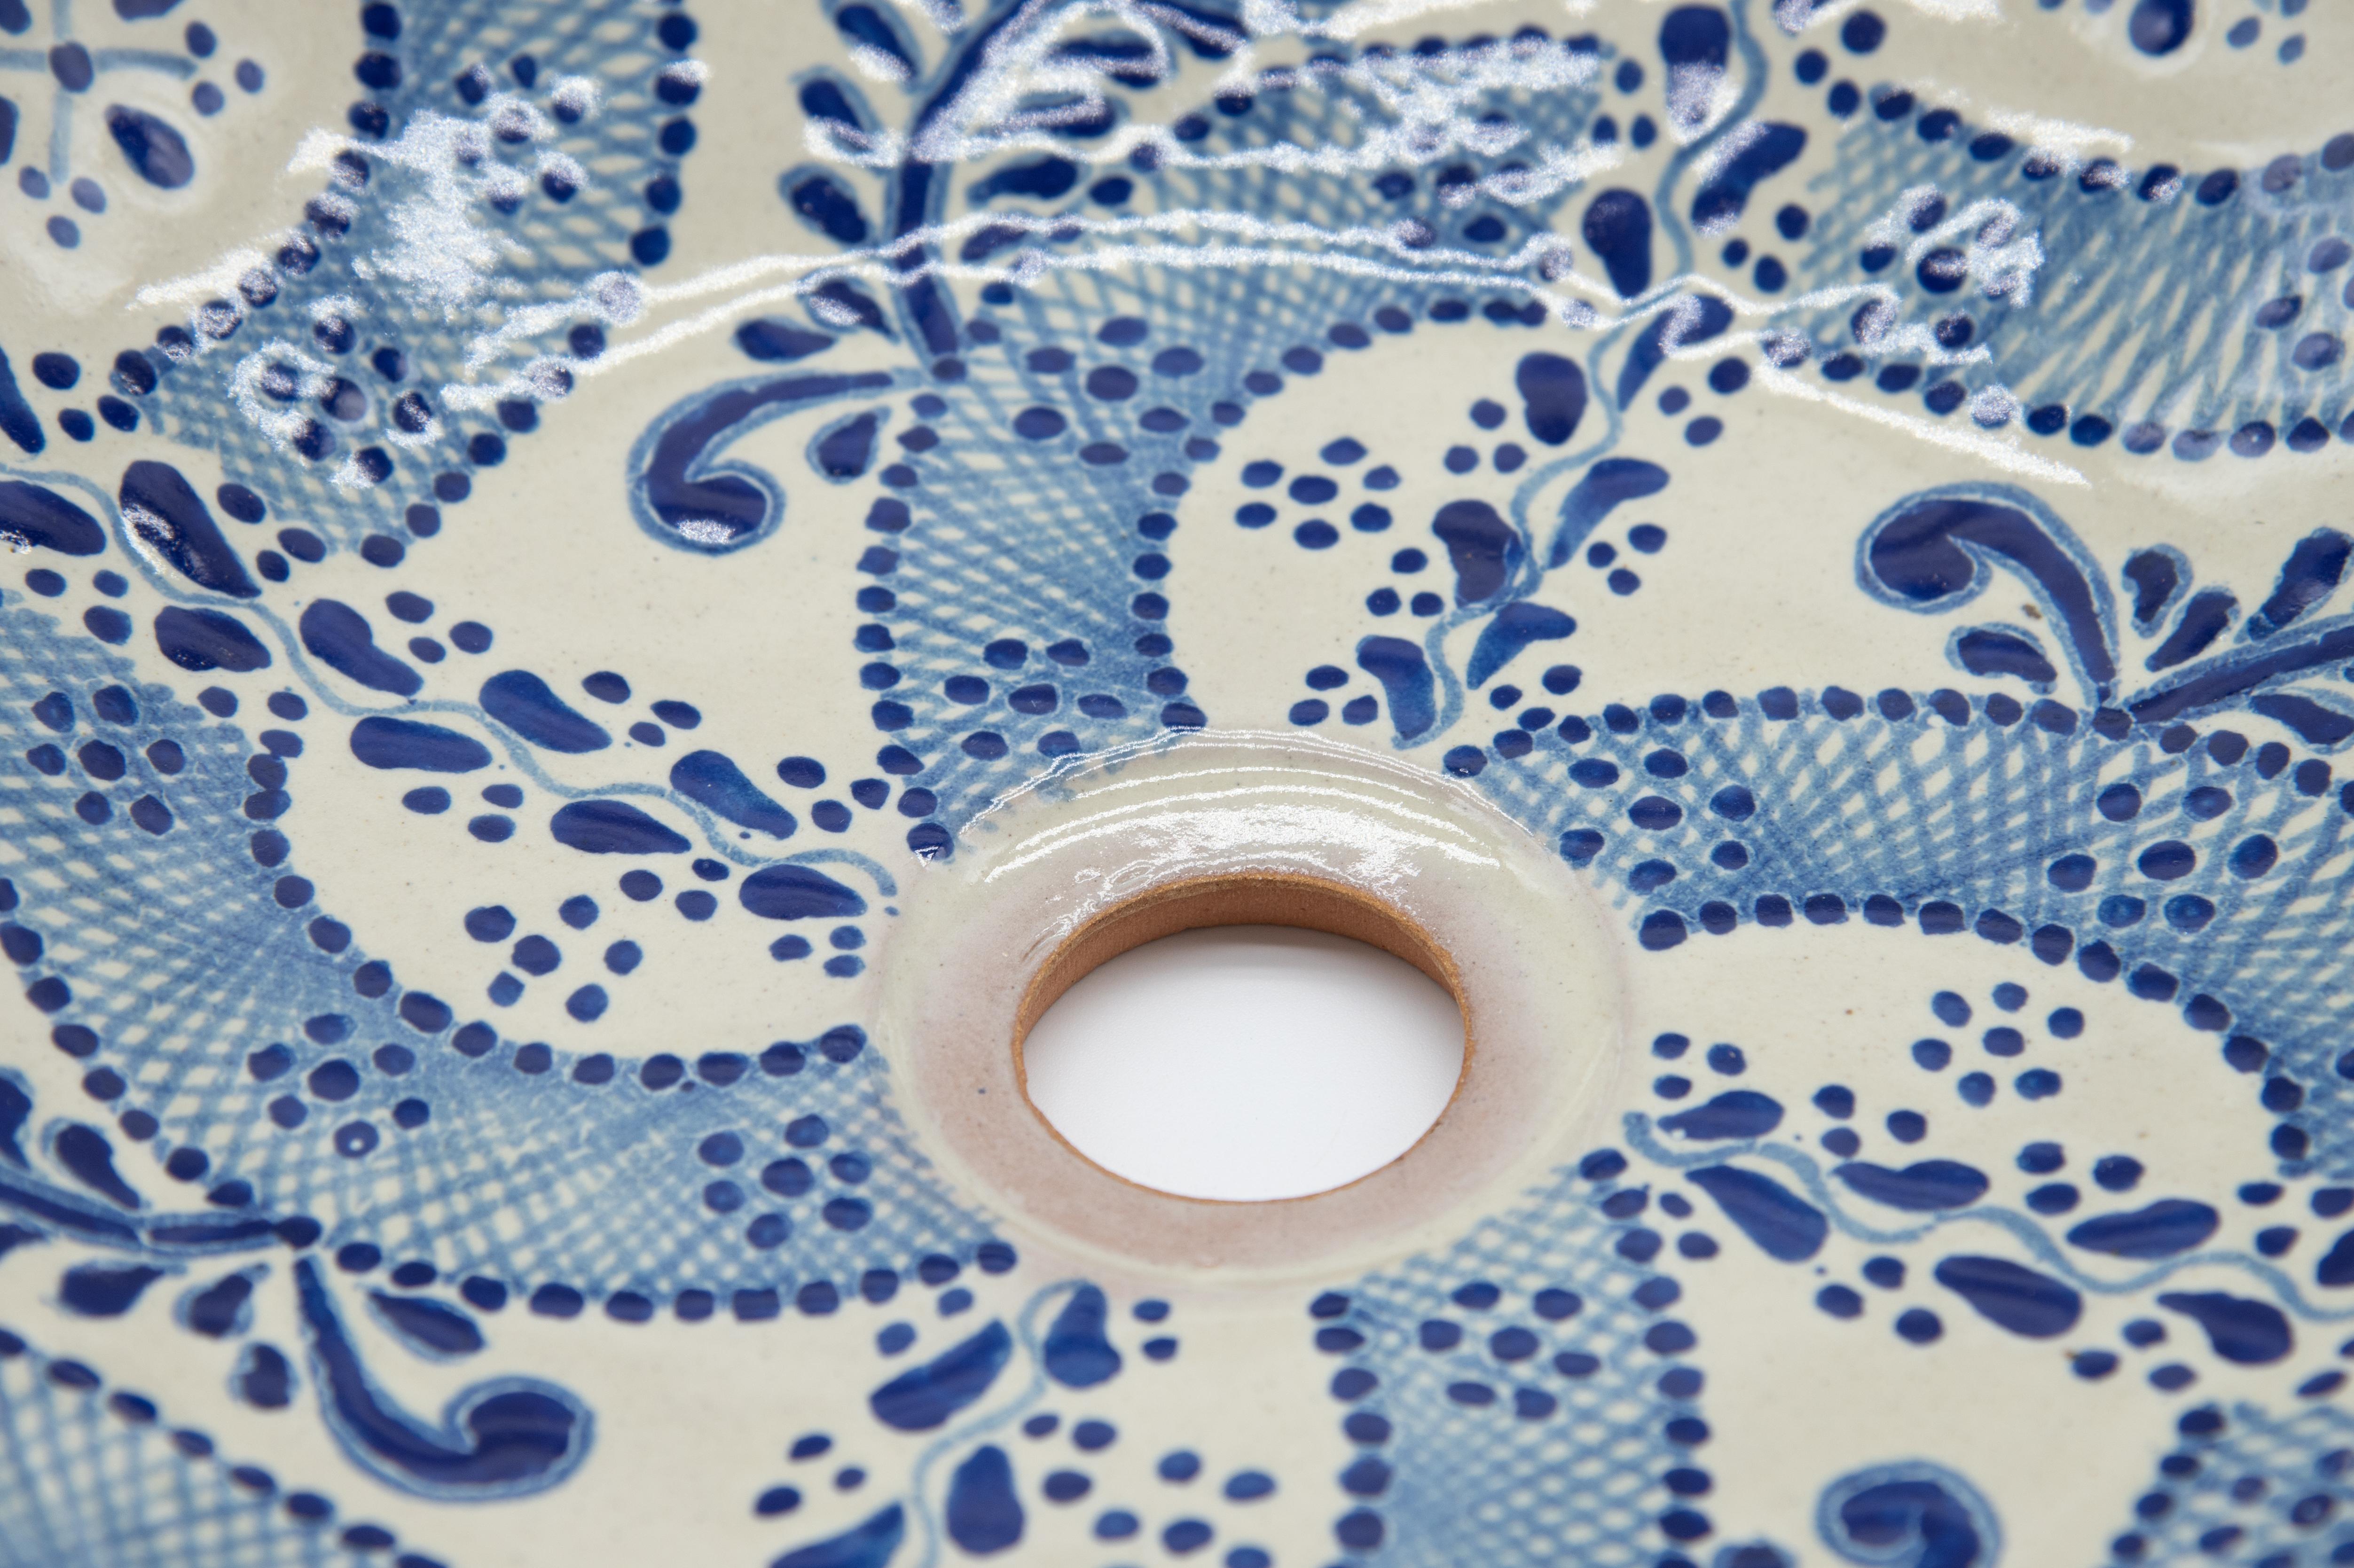 Elegant white and blue sink lavabo made with the Talavera technique. Artist, Cesar Torres portraits the colonial art of Mexico. 

The Talavera is not just a simple painted ceramic: its exquisite decoration is the product of a delicate process of